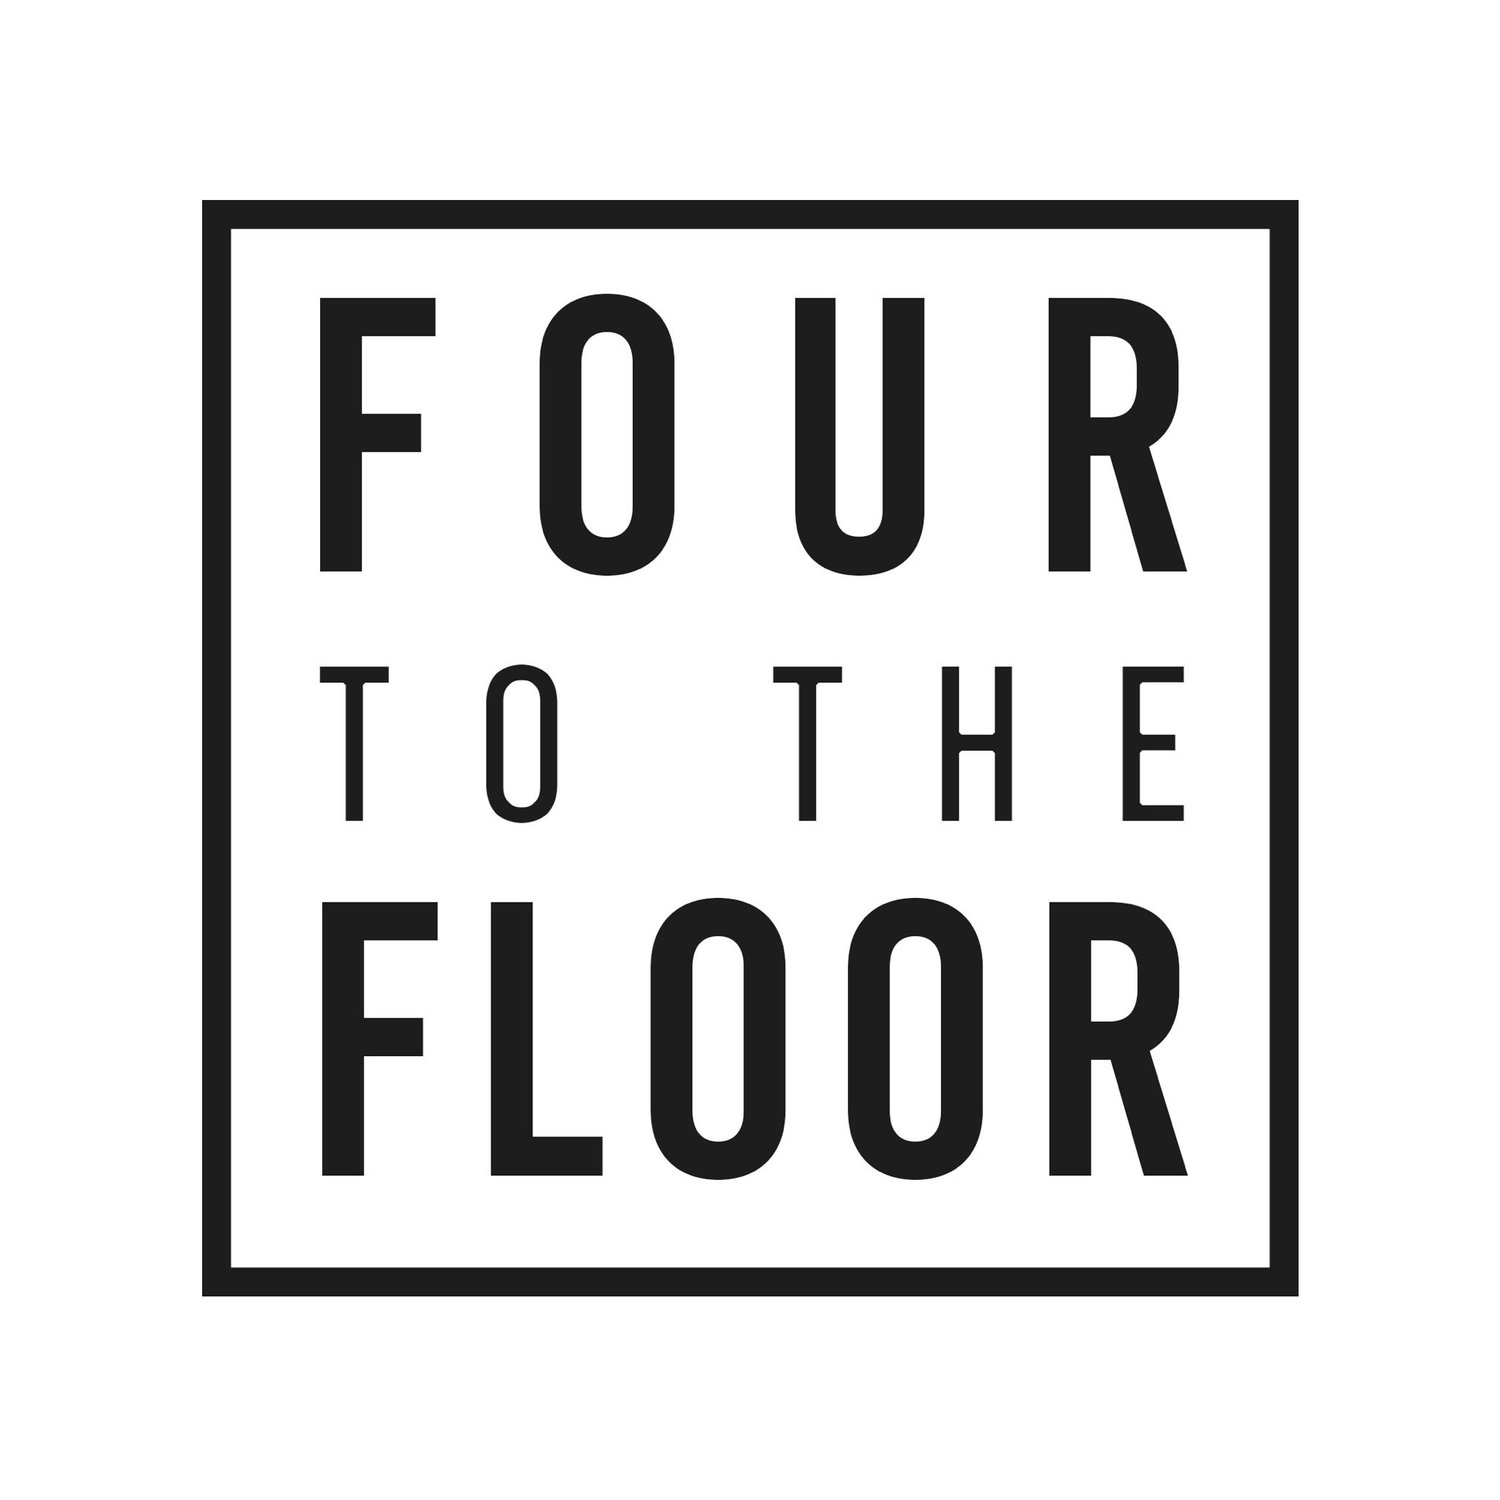 Four to the Floor